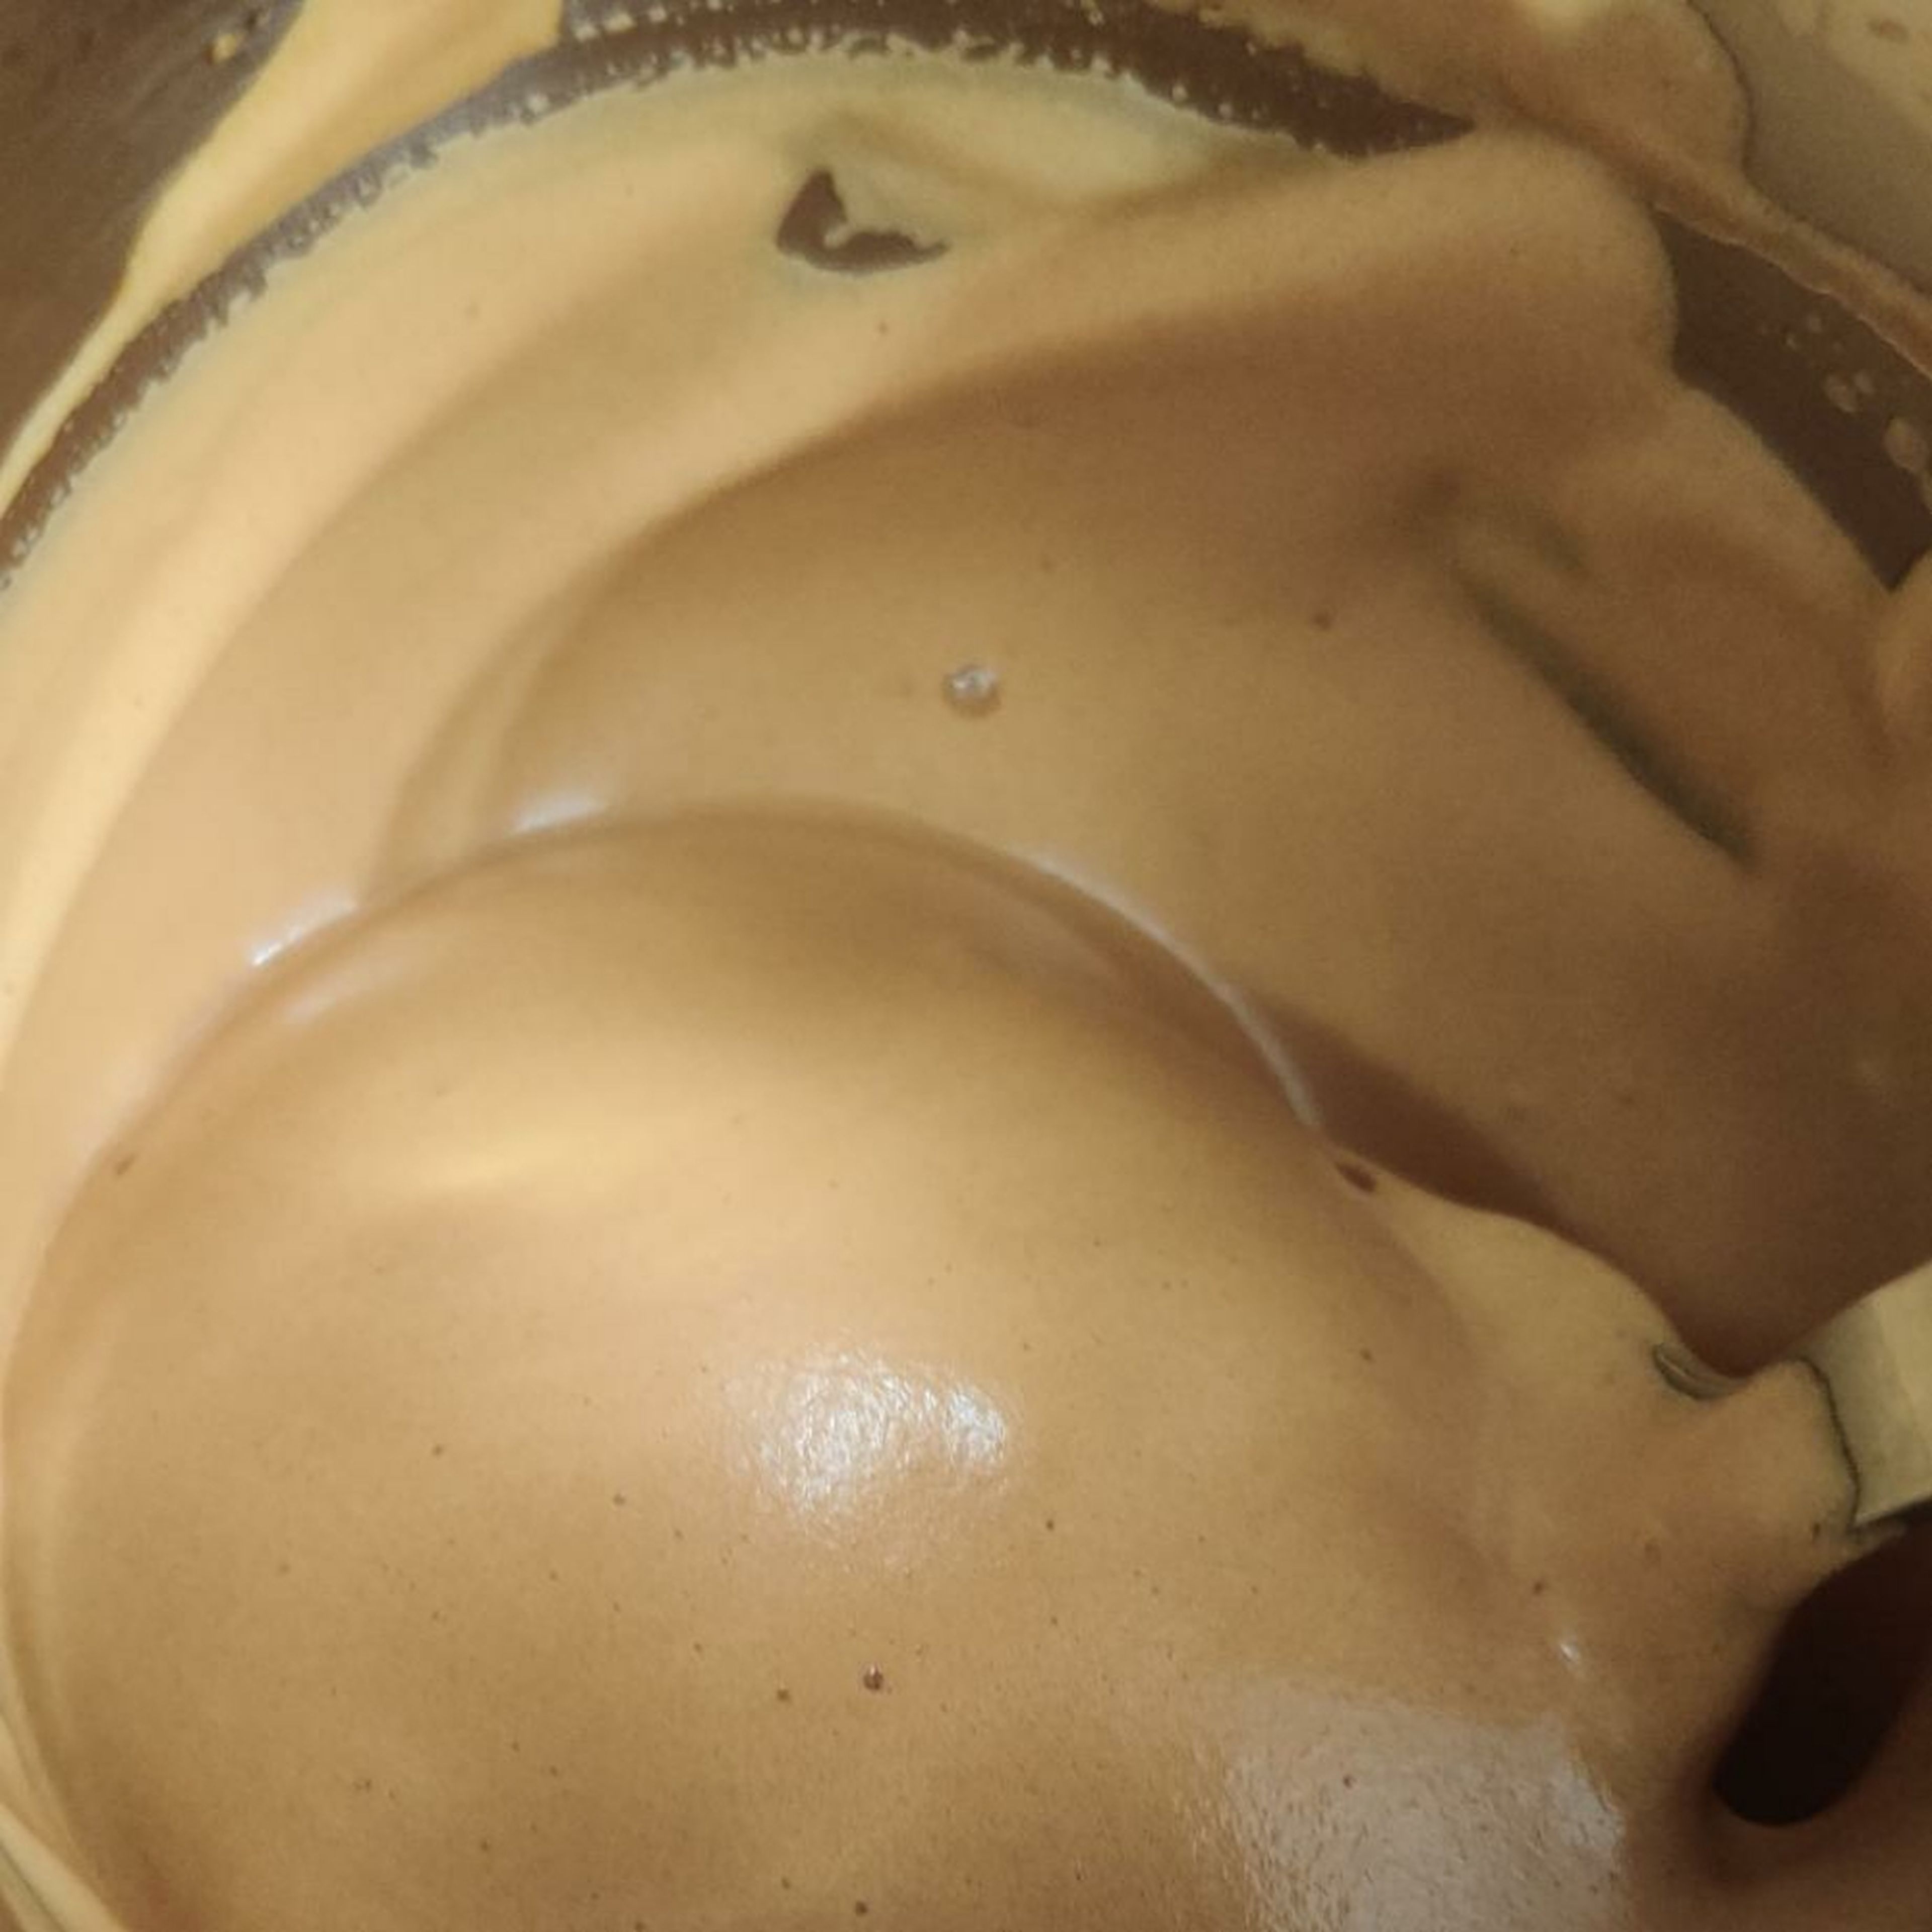 After 7 minutes of whisking coffee becomes creamy and lighter in color.